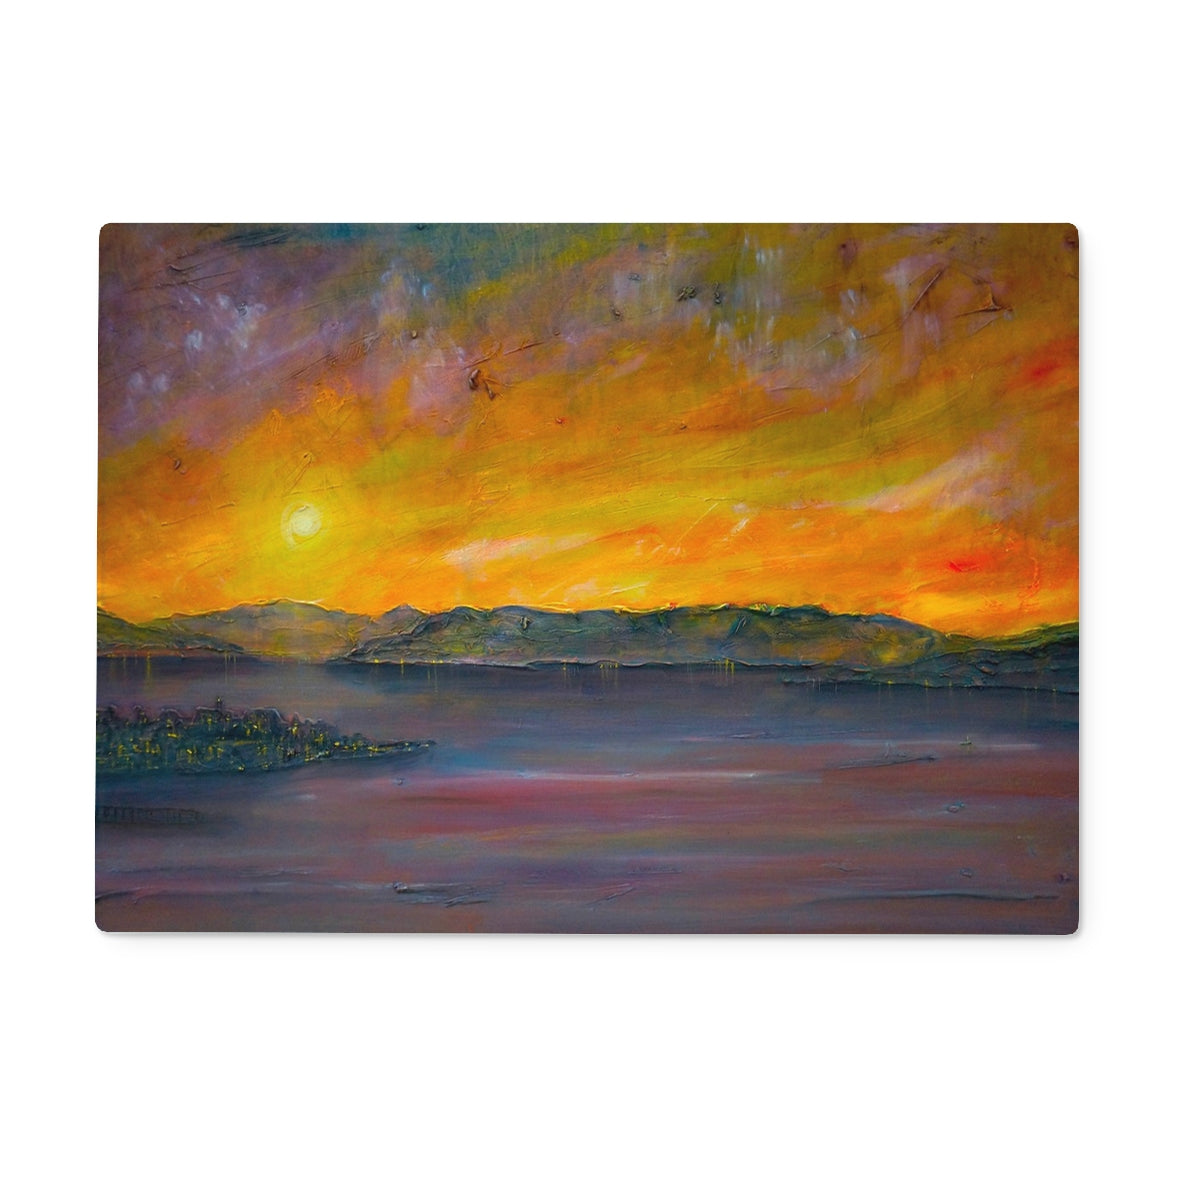 Sunset Over Gourock Art Gifts Glass Chopping Board-Glass Chopping Boards-River Clyde Art Gallery-15"x11" Rectangular-Paintings, Prints, Homeware, Art Gifts From Scotland By Scottish Artist Kevin Hunter